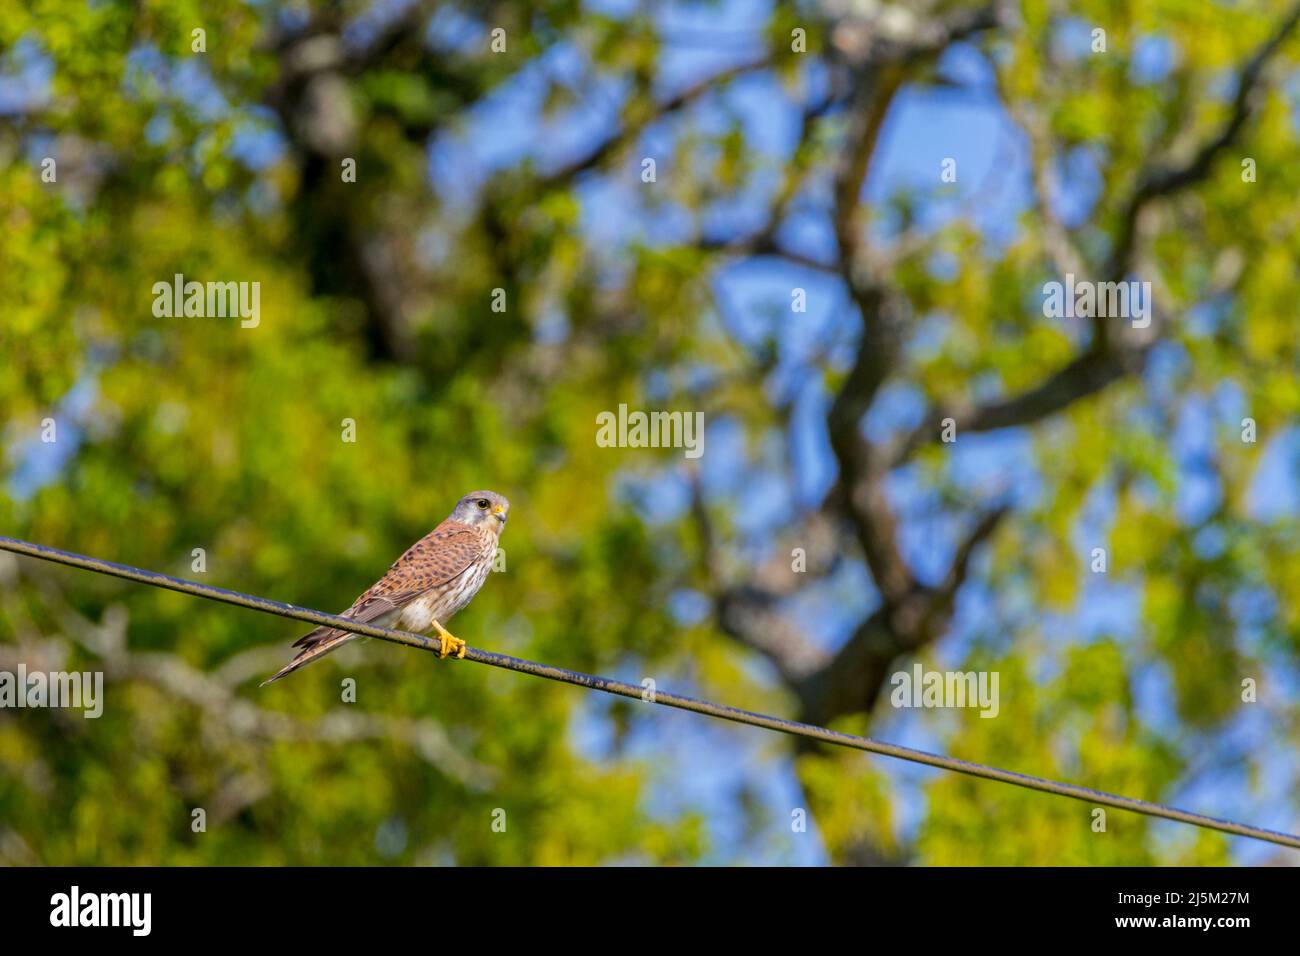 Kestrel (falco tinnunculus) male bird spotted orange brown back blue grey head and tail with terminal black band yellow feet eye ring and bill base Stock Photo